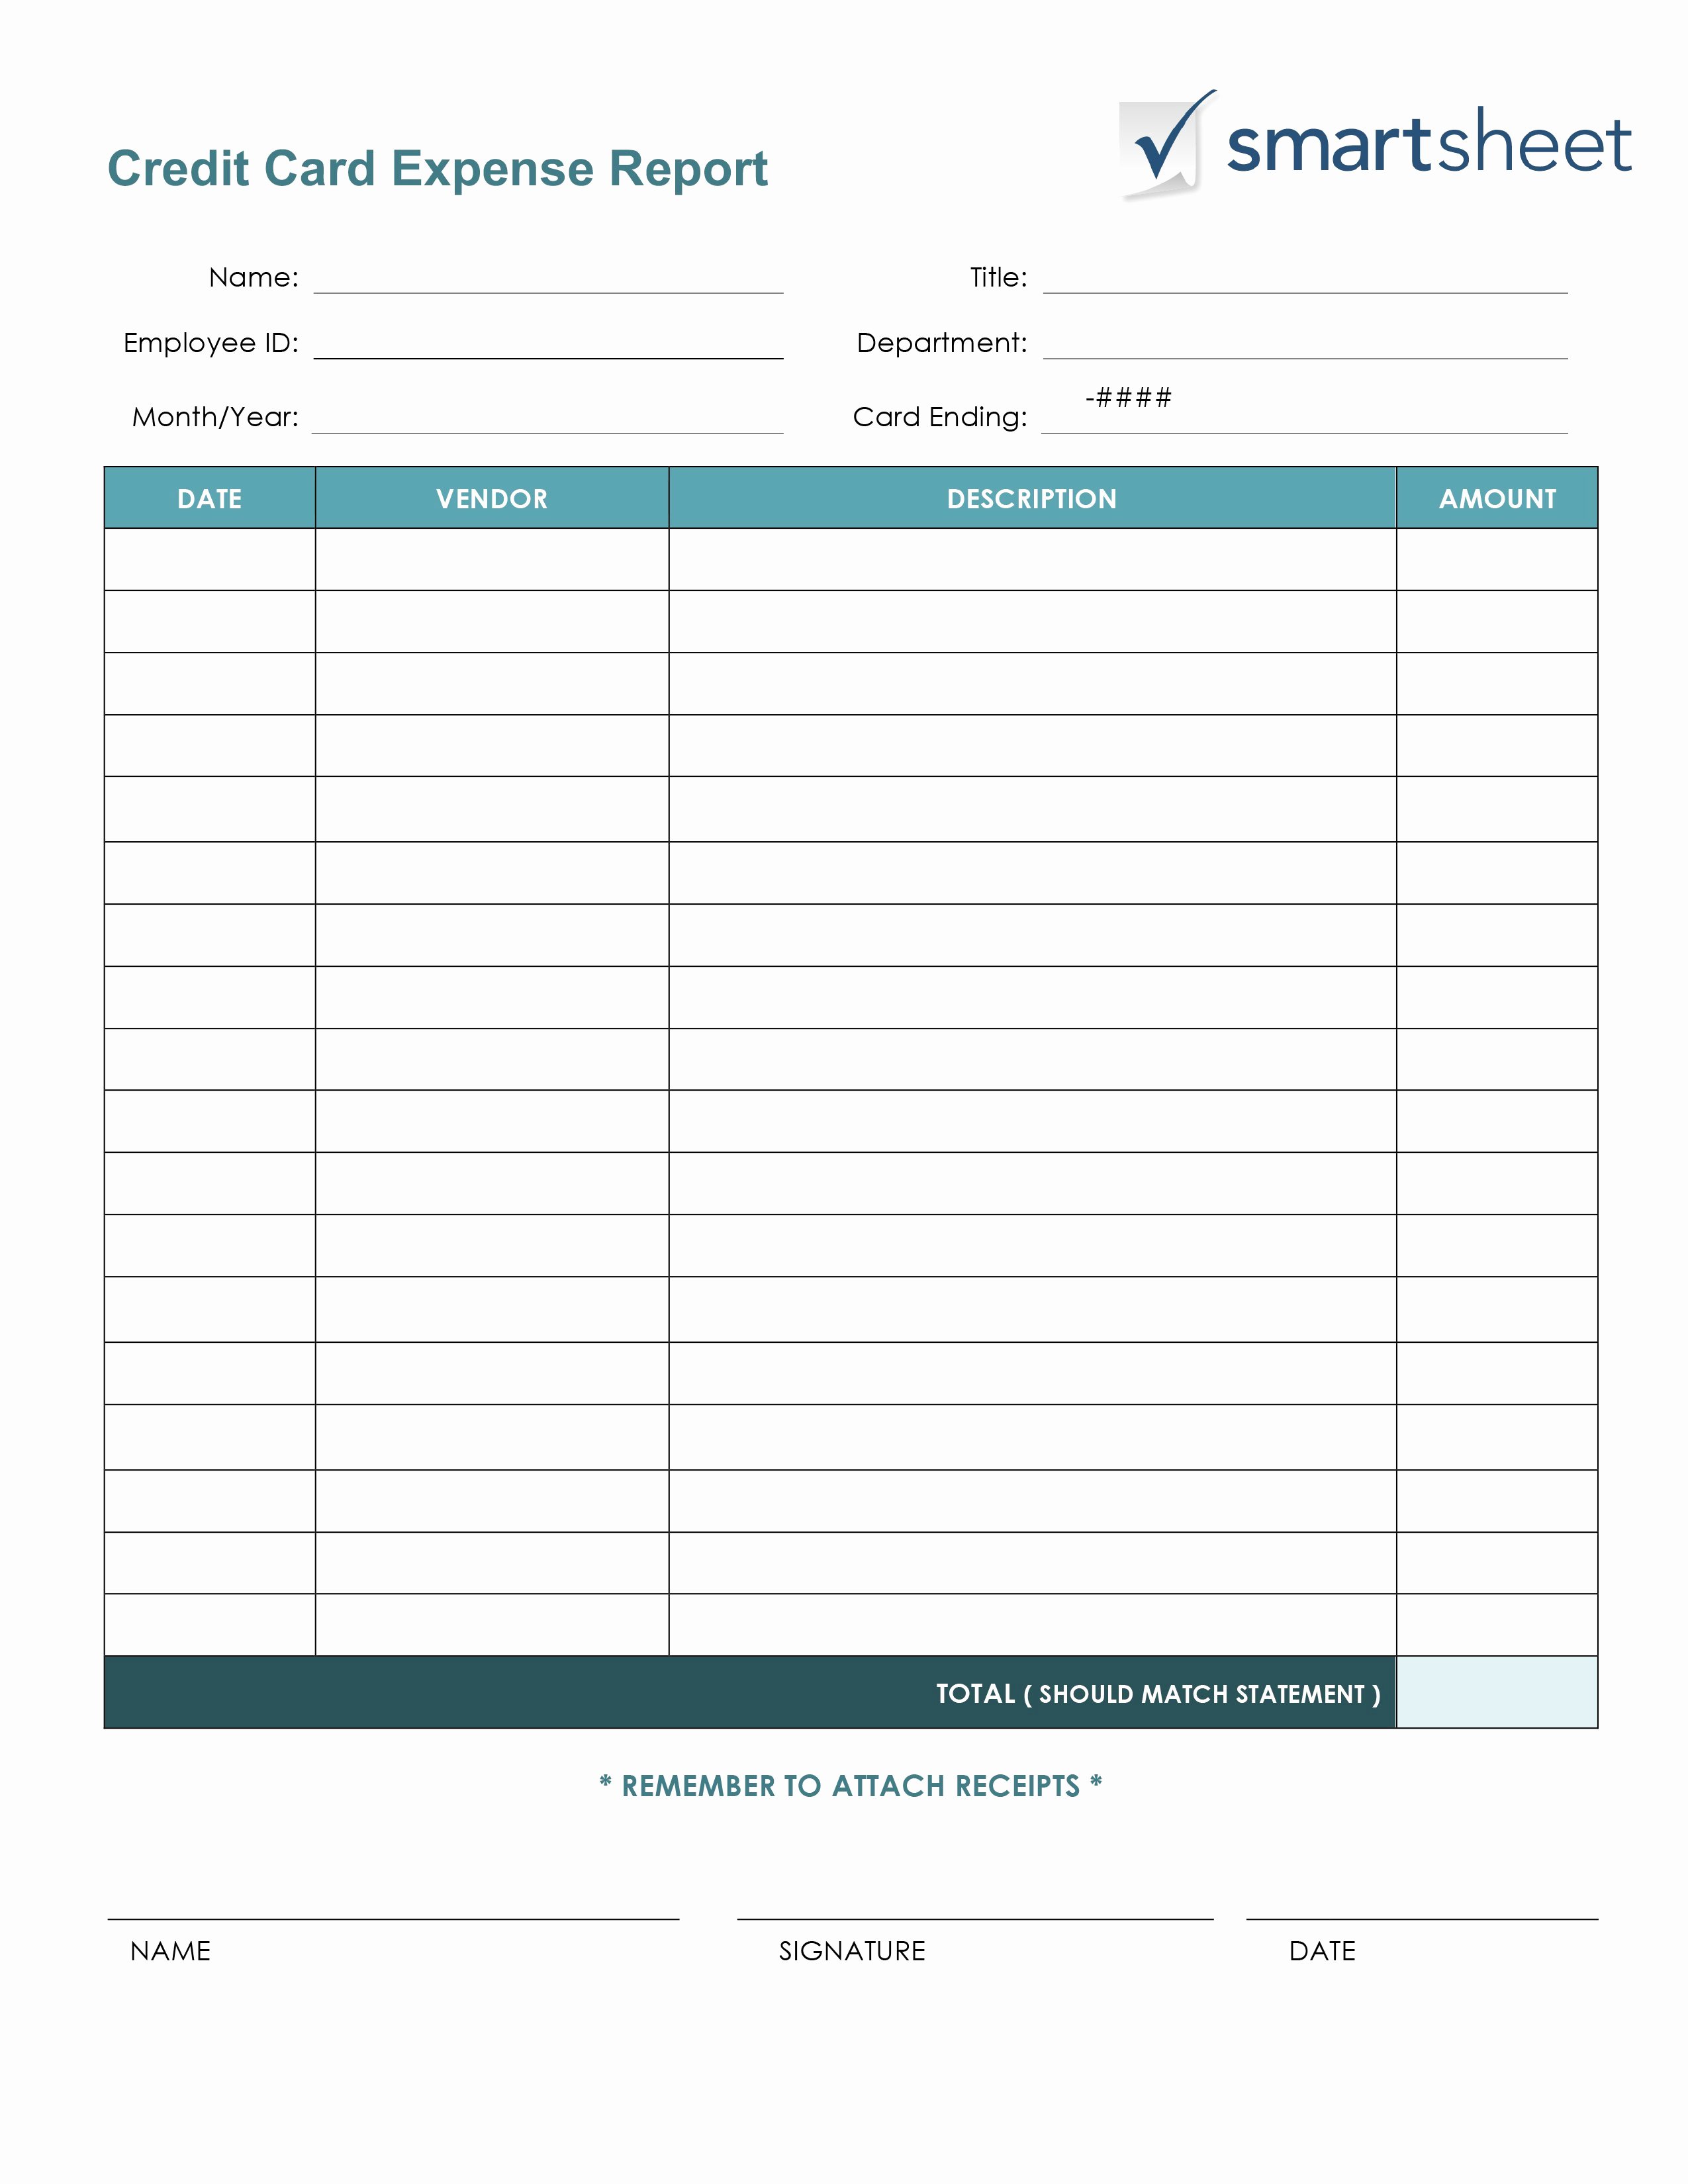 Expenses Report Template Excel New Free Expense Report Templates Smartsheet